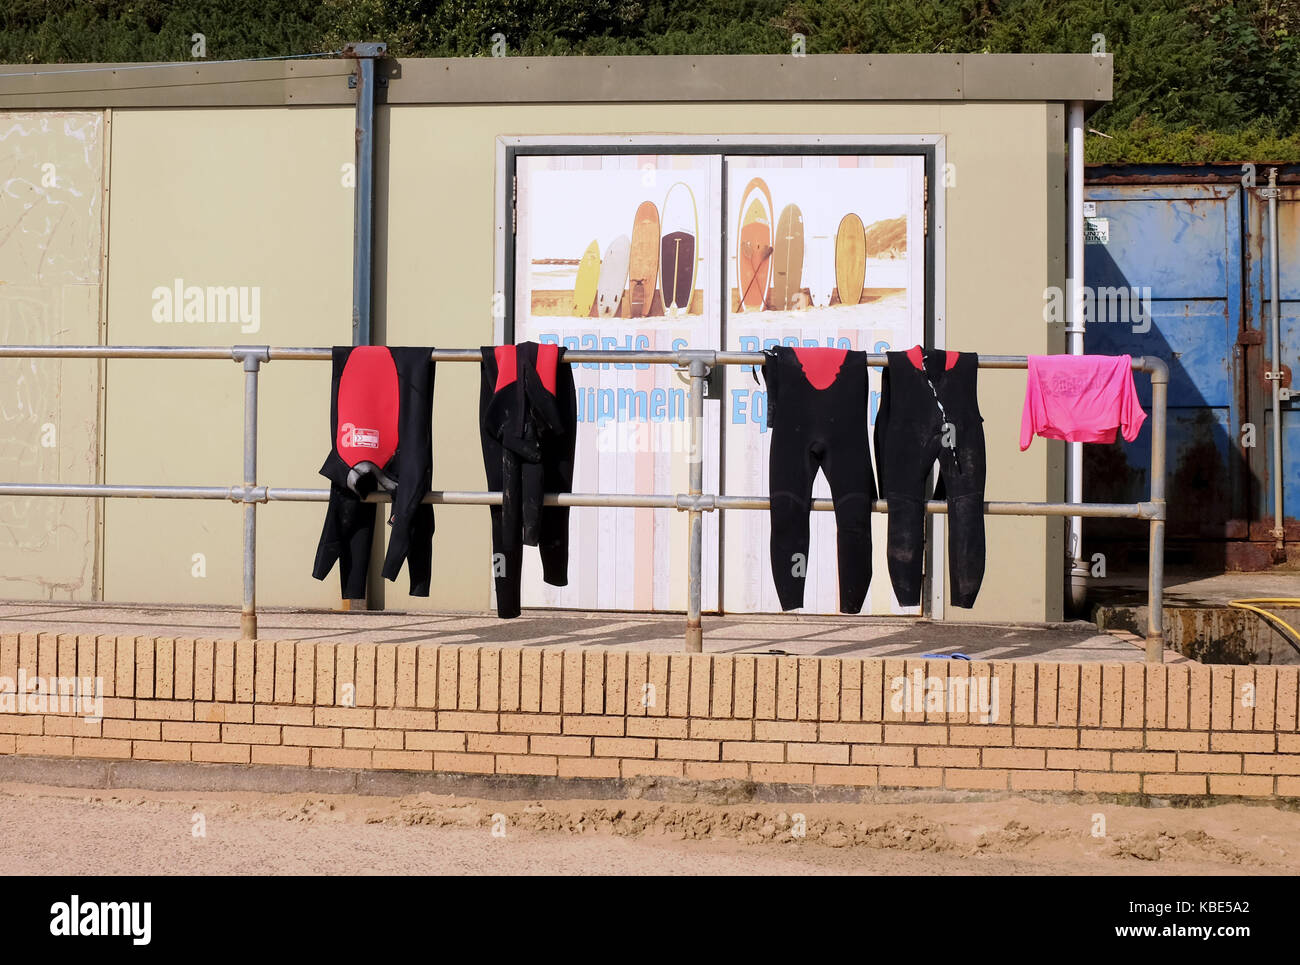 Bournemouth September 2017 - Wetsuits hanging out to dry at surf equiptment hire shop Boscombe Stock Photo